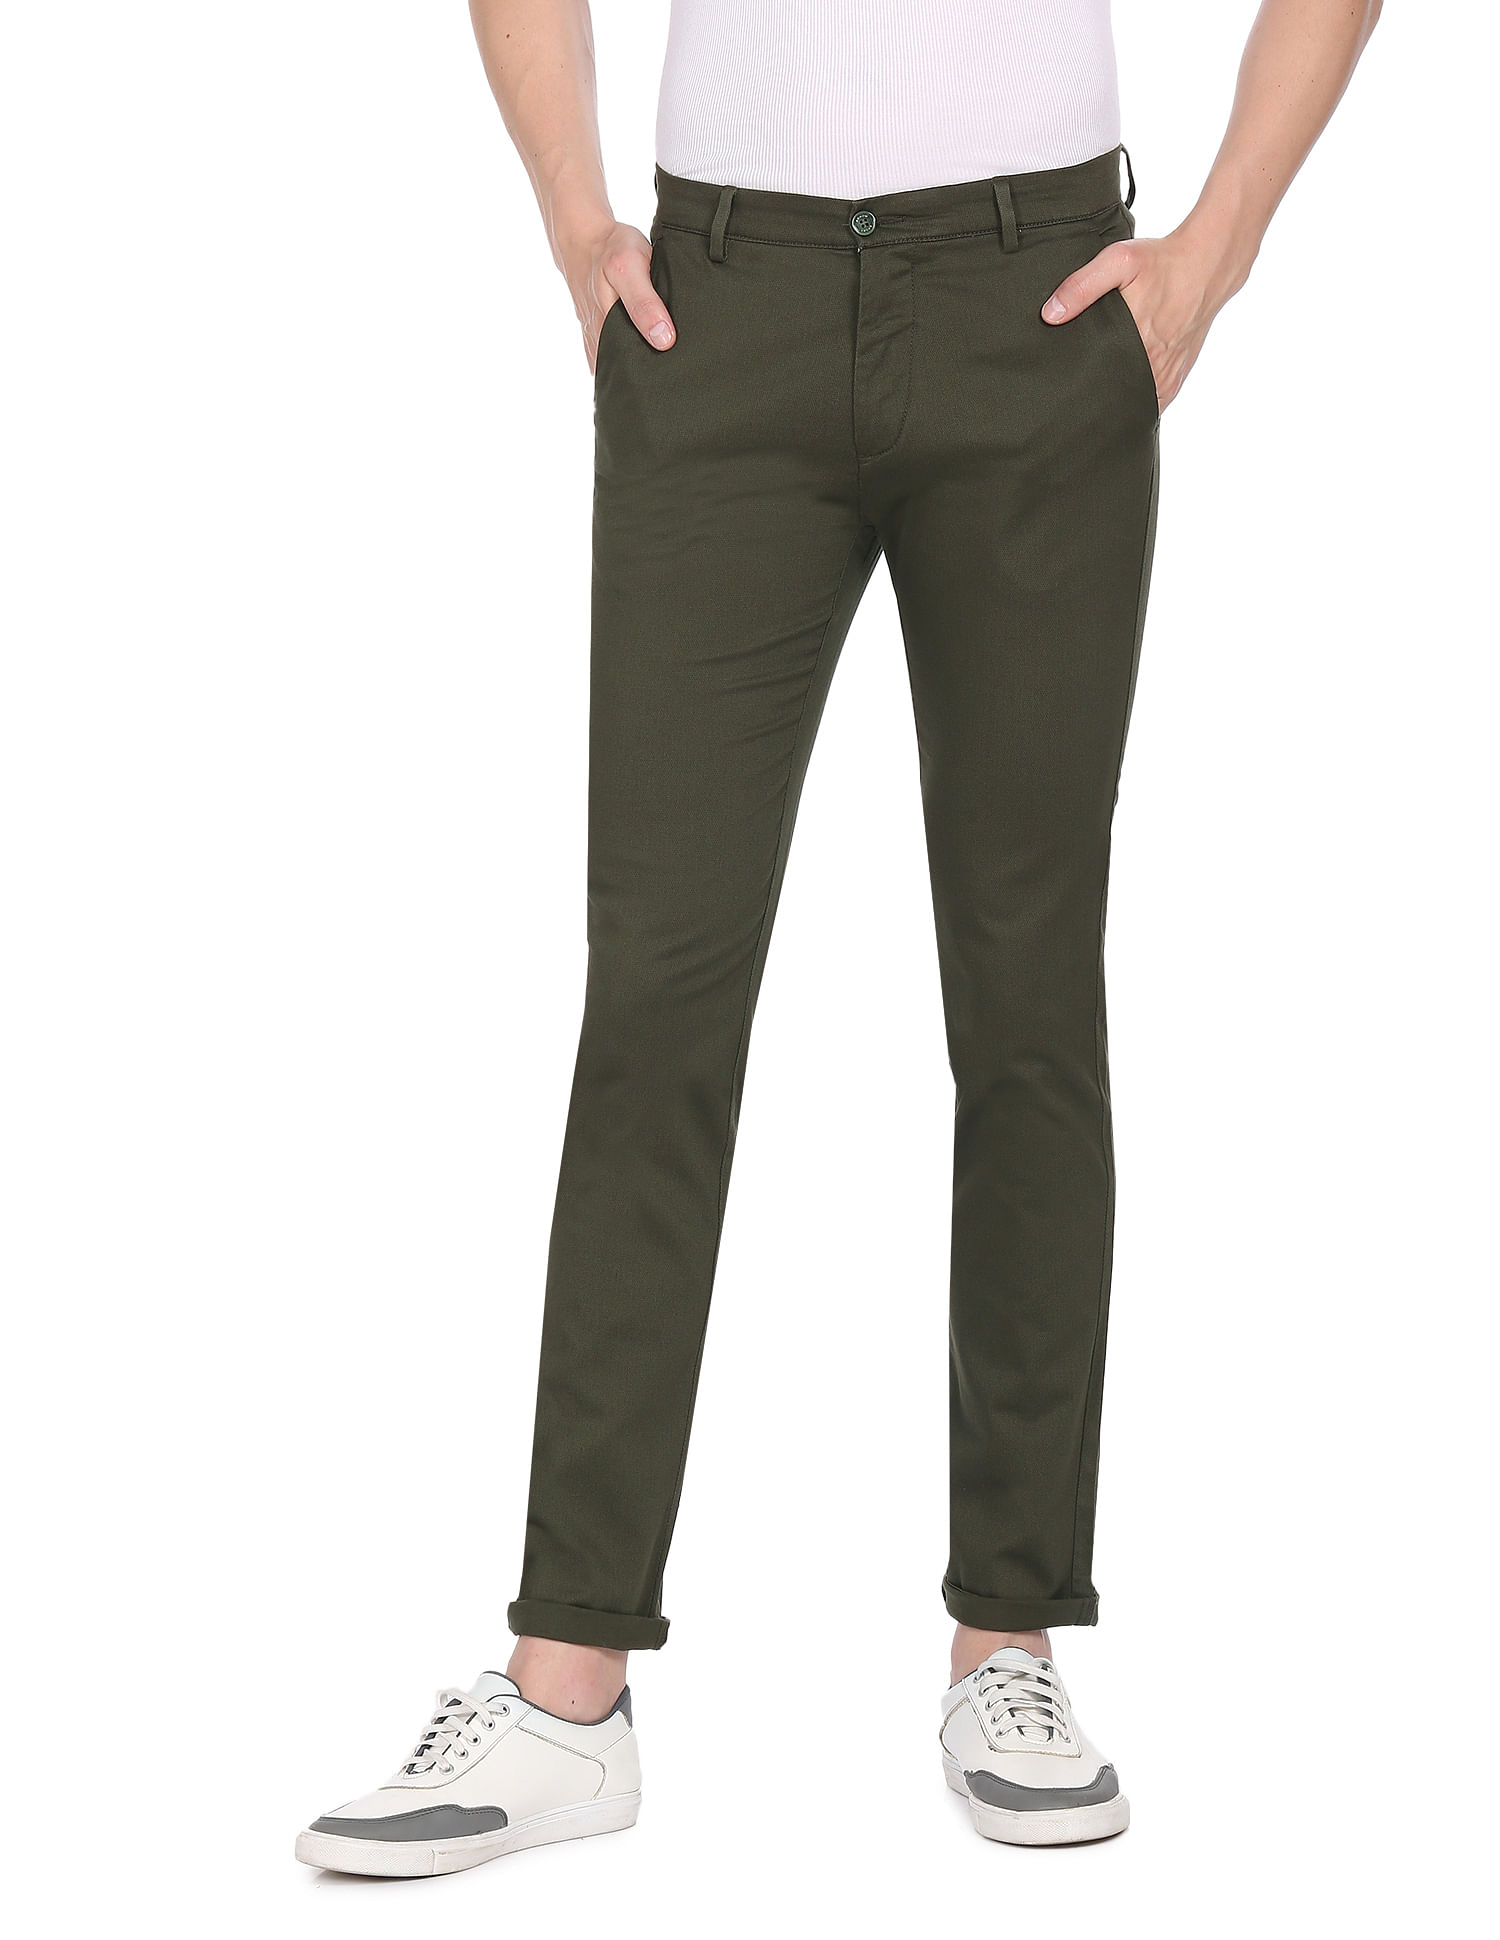 Men's hiking Trousers in 4-Way-Stretch Material